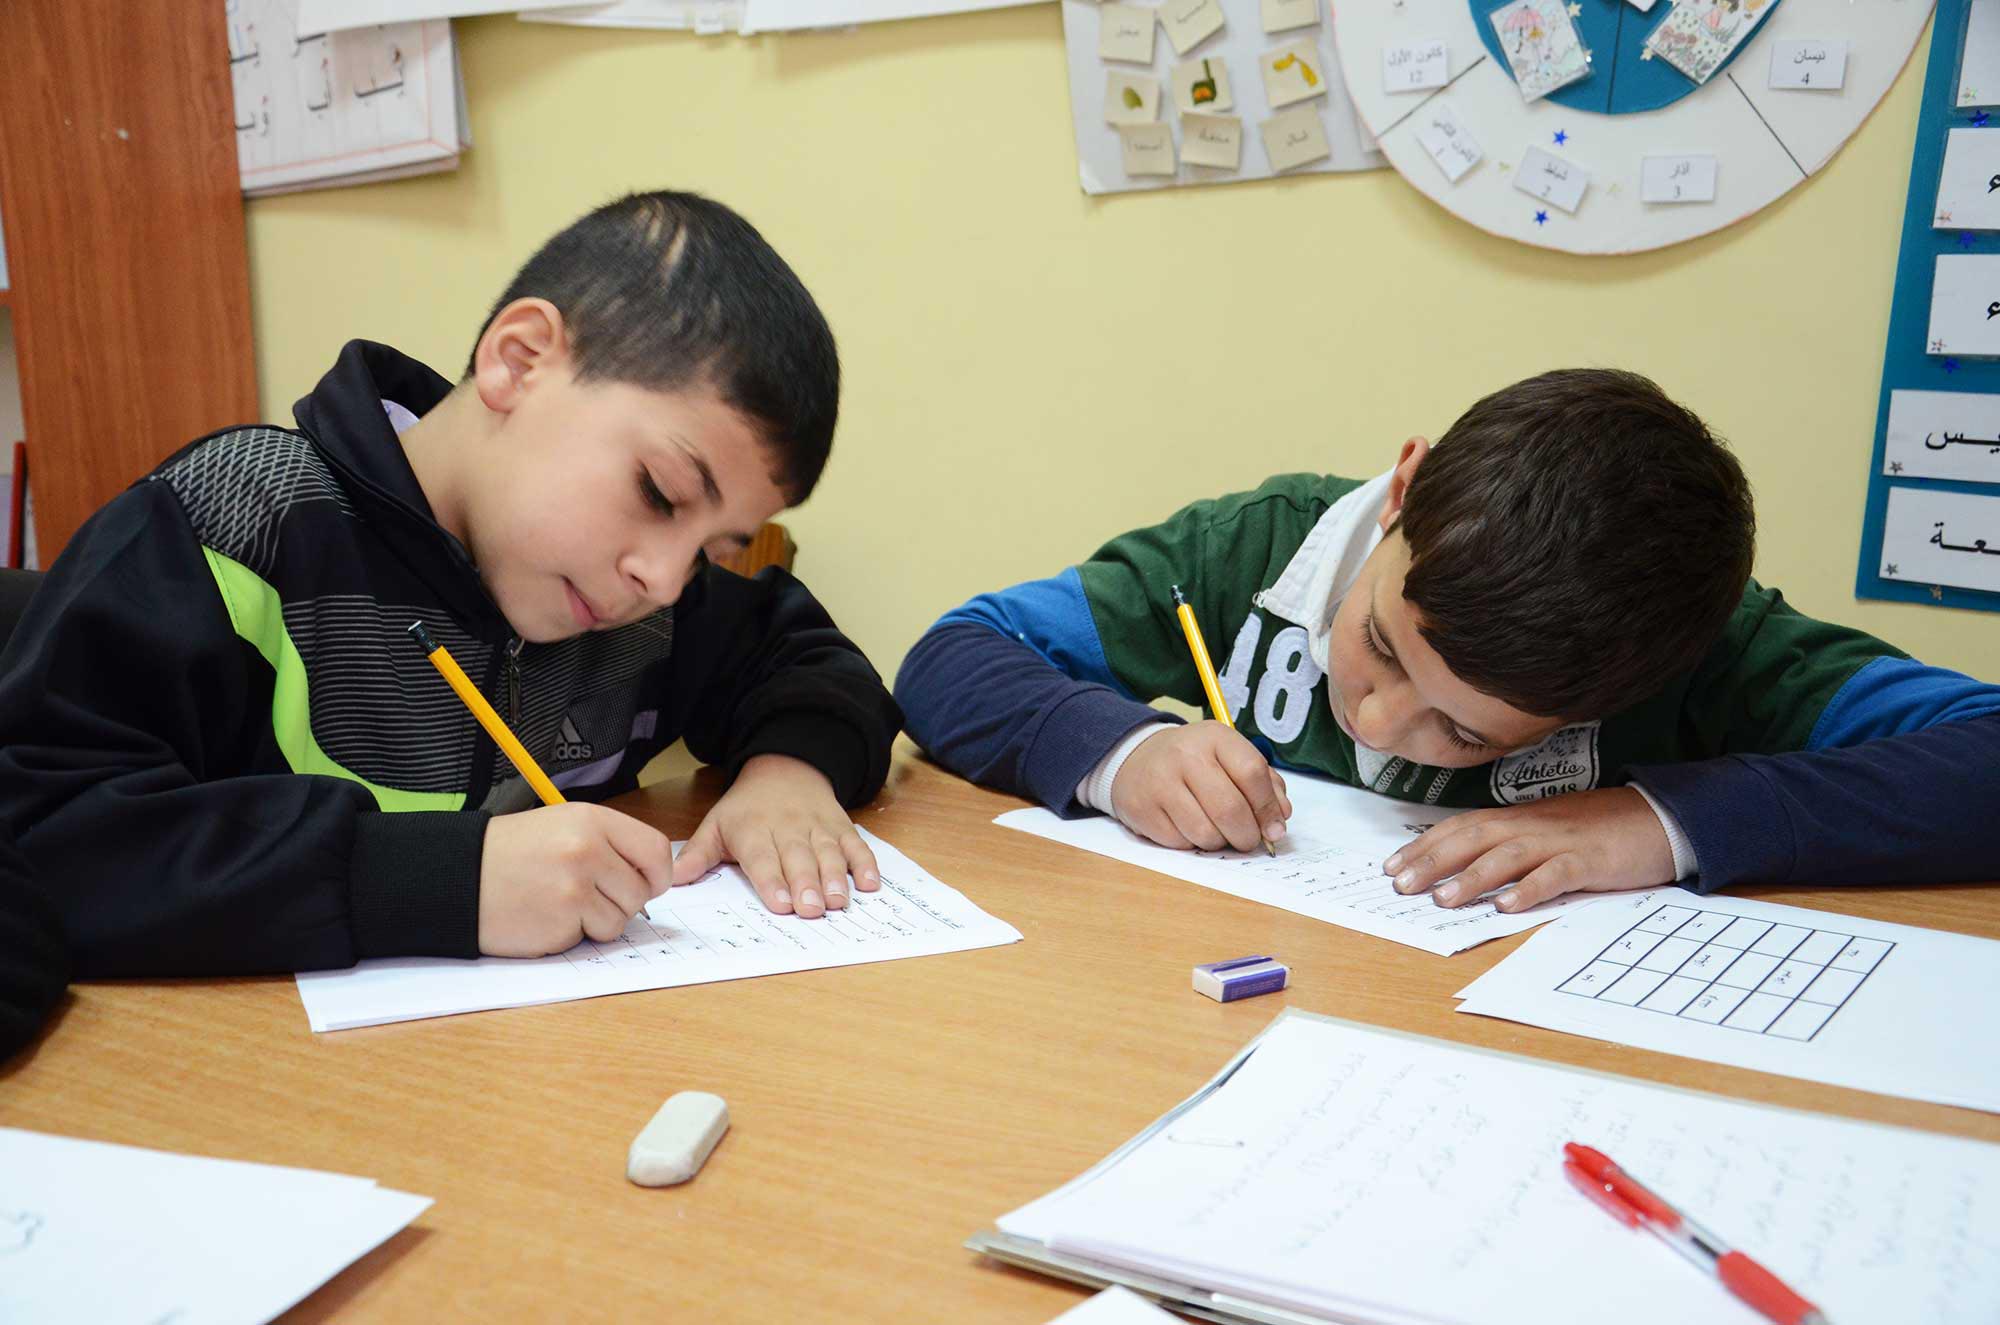 Two boys work on their activity sheets in the classroom. Small class sizes give the children more opportunities for individualized attention.